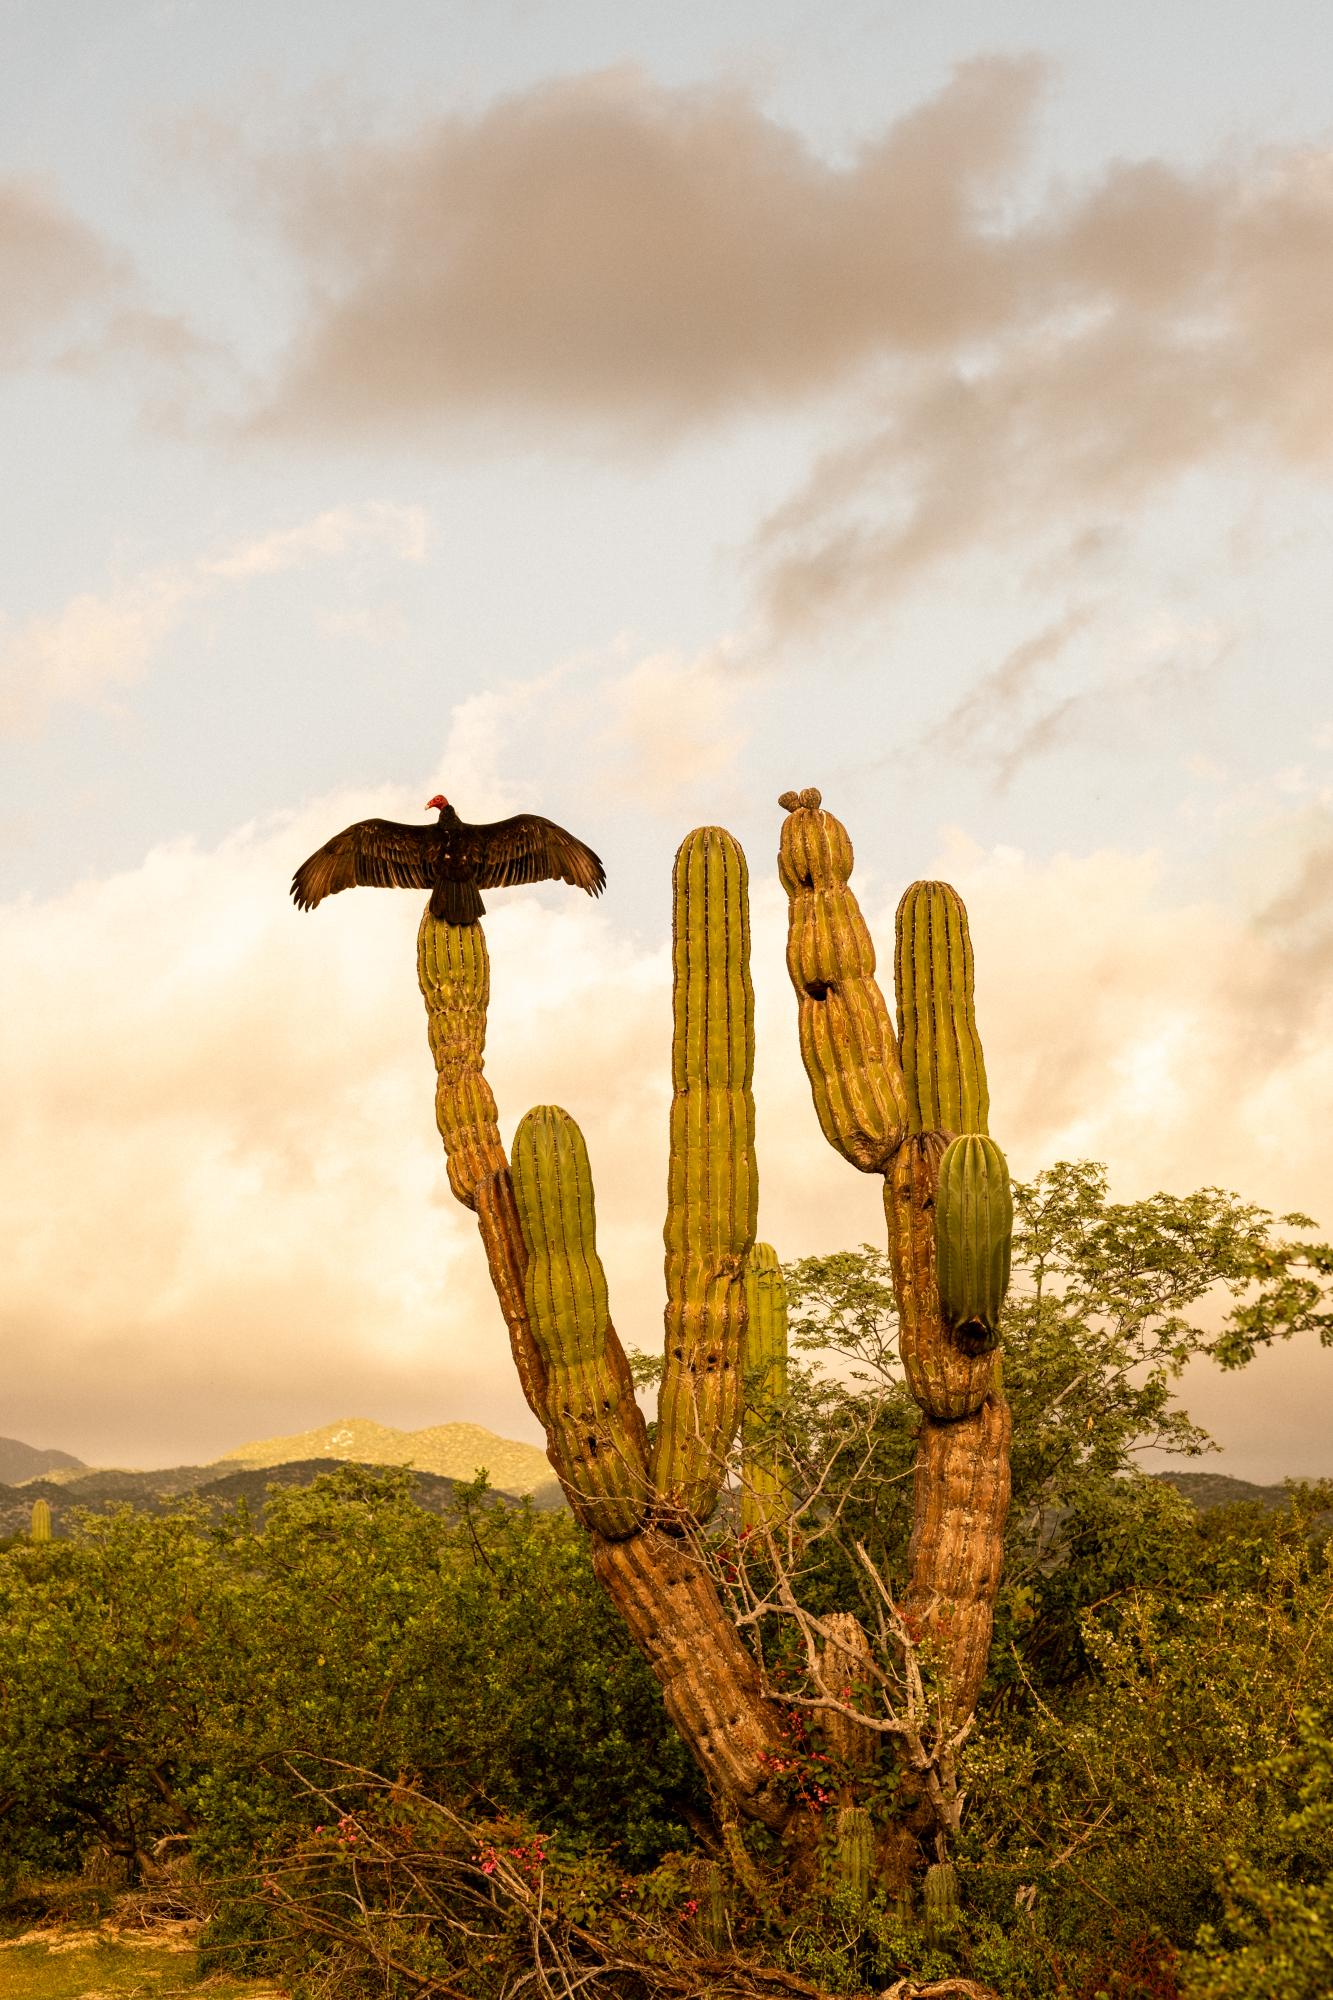 A Warm Winter (An Ongoing Journey) - A vulture spotted on my early morning hike in El...